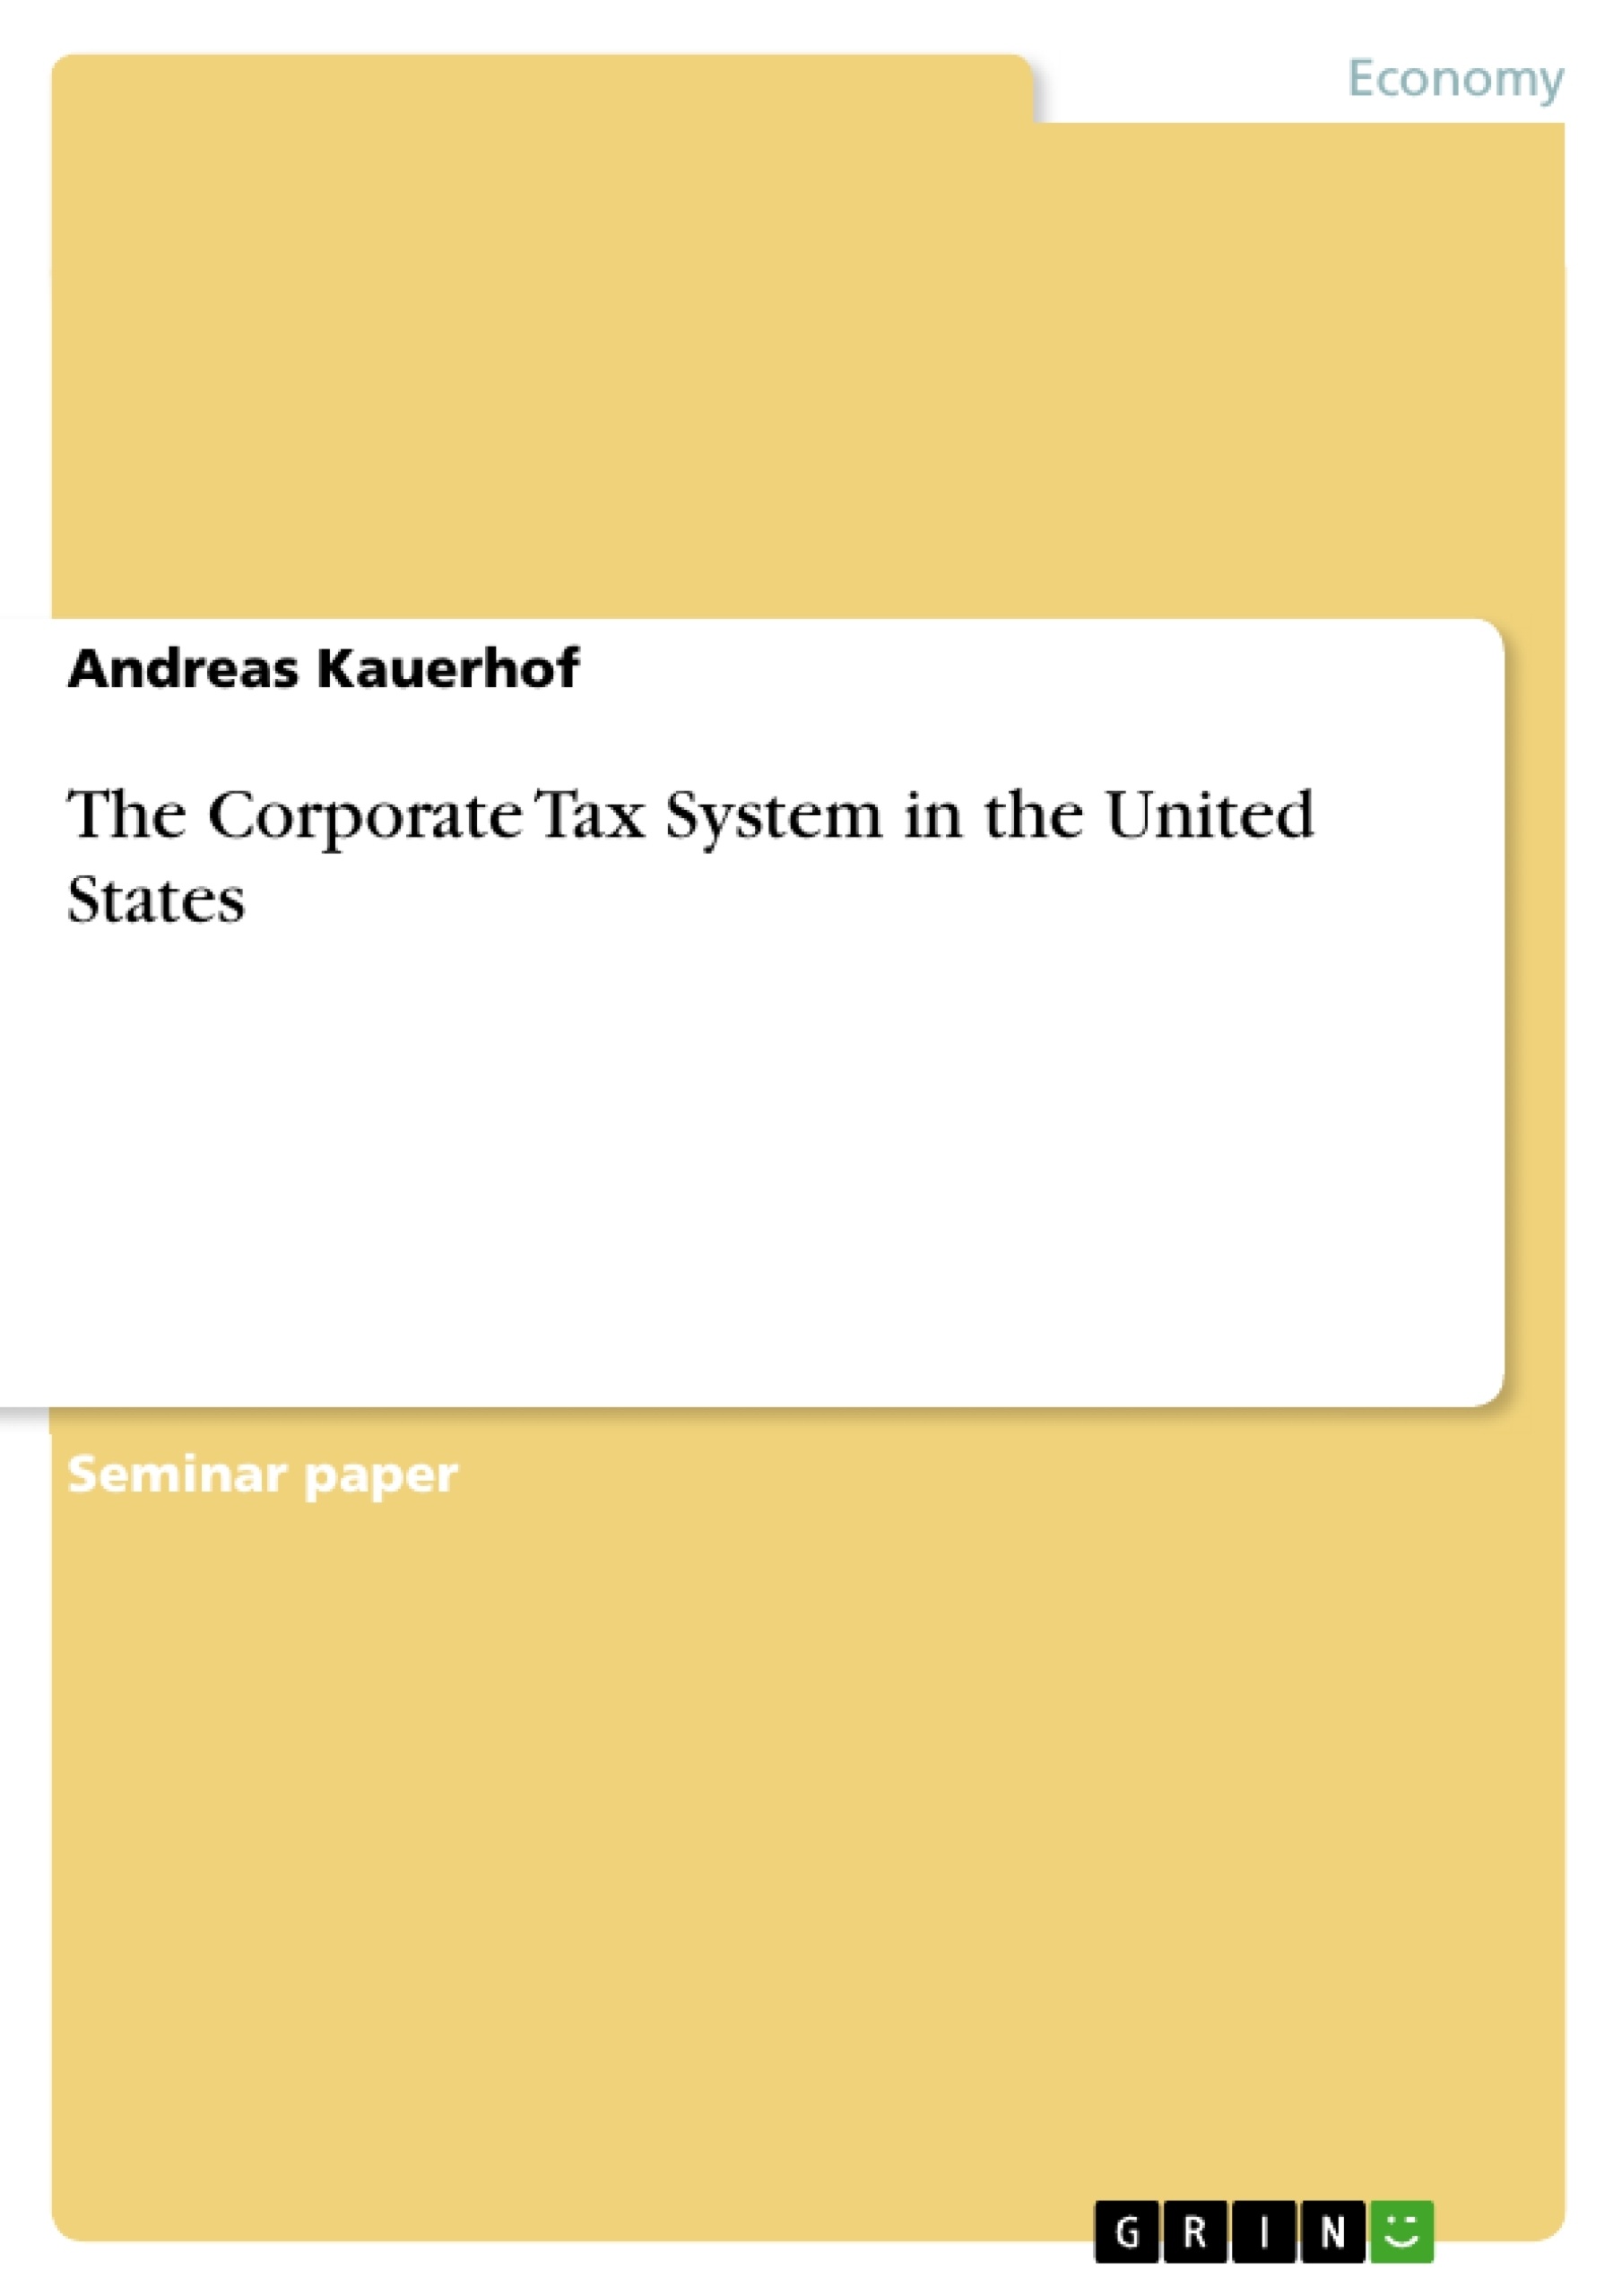 Title: The Corporate Tax System in the United States